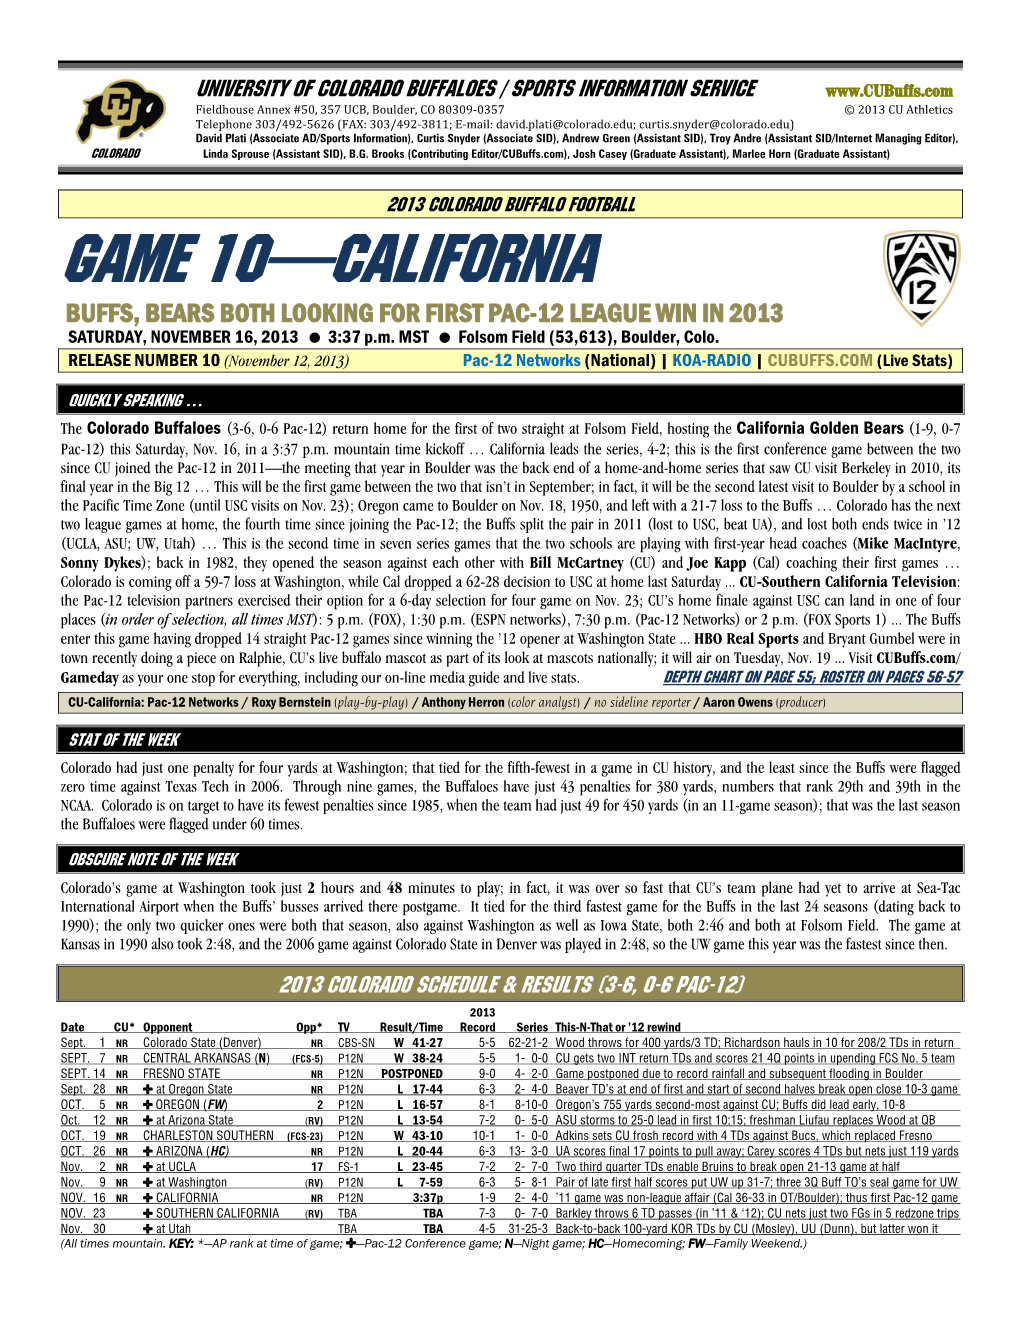 GAME 10—CALIFORNIA BUFFS, BEARS BOTH LOOKING for FIRST PAC-12 LEAGUE WIN in 2013 SATURDAY, NOVEMBER 16, 2013 3:37 P.M